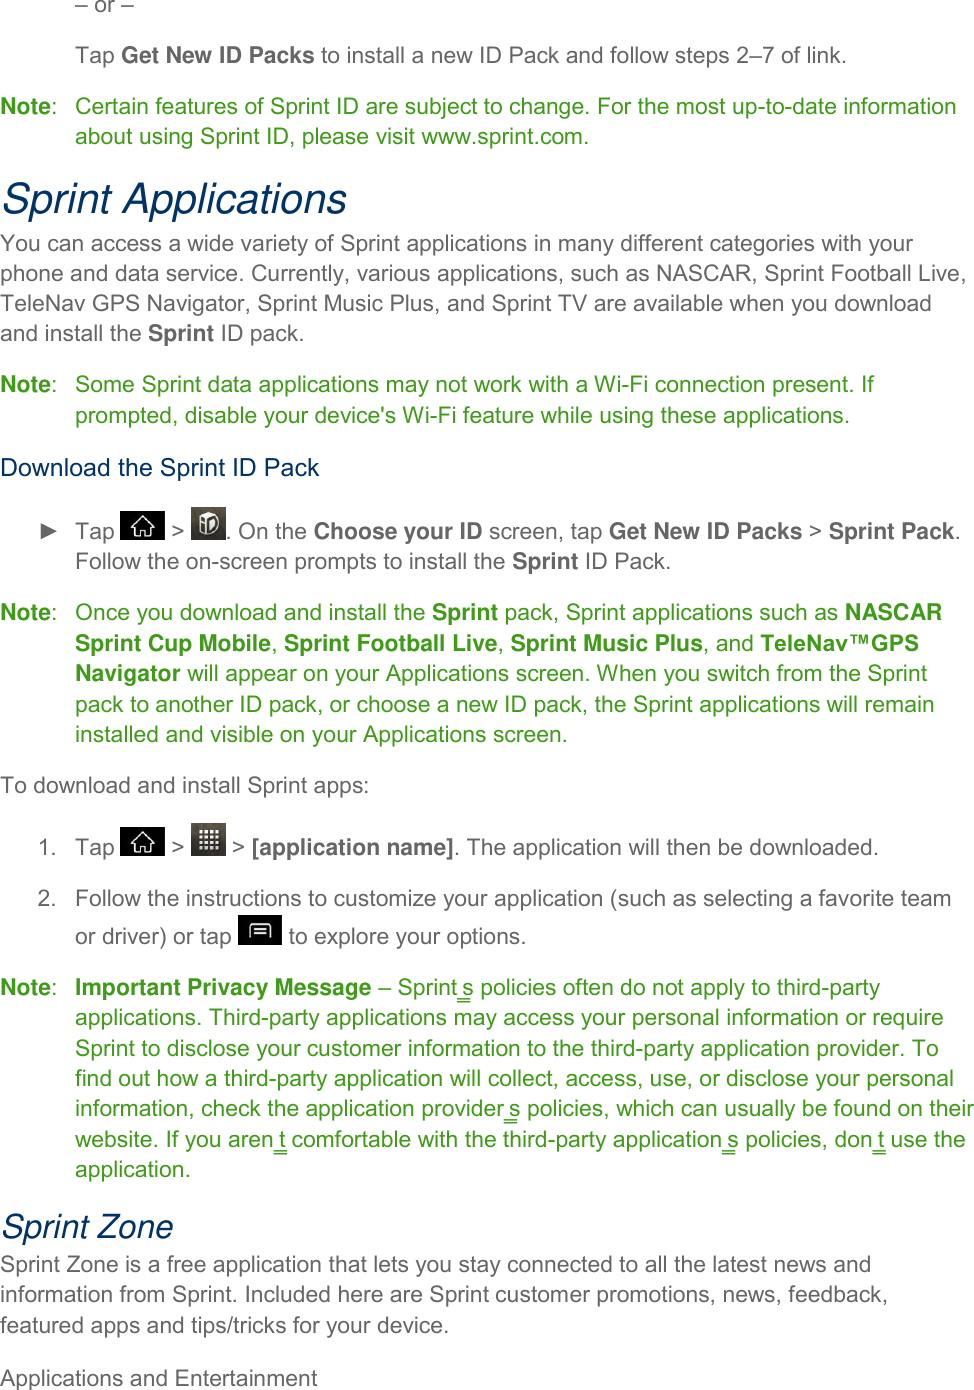 Applications and Entertainment     – or – Tap Get New ID Packs to install a new ID Pack and follow steps 2–7 of link. Note:   Certain features of Sprint ID are subject to change. For the most up-to-date information about using Sprint ID, please visit www.sprint.com. Sprint Applications You can access a wide variety of Sprint applications in many different categories with your phone and data service. Currently, various applications, such as NASCAR, Sprint Football Live, TeleNav GPS Navigator, Sprint Music Plus, and Sprint TV are available when you download and install the Sprint ID pack. Note:   Some Sprint data applications may not work with a Wi-Fi connection present. If prompted, disable your device&apos;s Wi-Fi feature while using these applications. Download the Sprint ID Pack ►  Tap   &gt;  . On the Choose your ID screen, tap Get New ID Packs &gt; Sprint Pack. Follow the on-screen prompts to install the Sprint ID Pack. Note:   Once you download and install the Sprint pack, Sprint applications such as NASCAR Sprint Cup Mobile, Sprint Football Live, Sprint Music Plus, and TeleNav™GPS Navigator will appear on your Applications screen. When you switch from the Sprint pack to another ID pack, or choose a new ID pack, the Sprint applications will remain installed and visible on your Applications screen. To download and install Sprint apps: 1.  Tap   &gt;   &gt; [application name]. The application will then be downloaded. 2.  Follow the instructions to customize your application (such as selecting a favorite team or driver) or tap   to explore your options. Note:  Important Privacy Message – Sprint‗s policies often do not apply to third-party applications. Third-party applications may access your personal information or require Sprint to disclose your customer information to the third-party application provider. To find out how a third-party application will collect, access, use, or disclose your personal information, check the application provider‗s policies, which can usually be found on their website. If you aren‗t comfortable with the third-party application‗s policies, don‗t use the application. Sprint Zone Sprint Zone is a free application that lets you stay connected to all the latest news and information from Sprint. Included here are Sprint customer promotions, news, feedback, featured apps and tips/tricks for your device. 